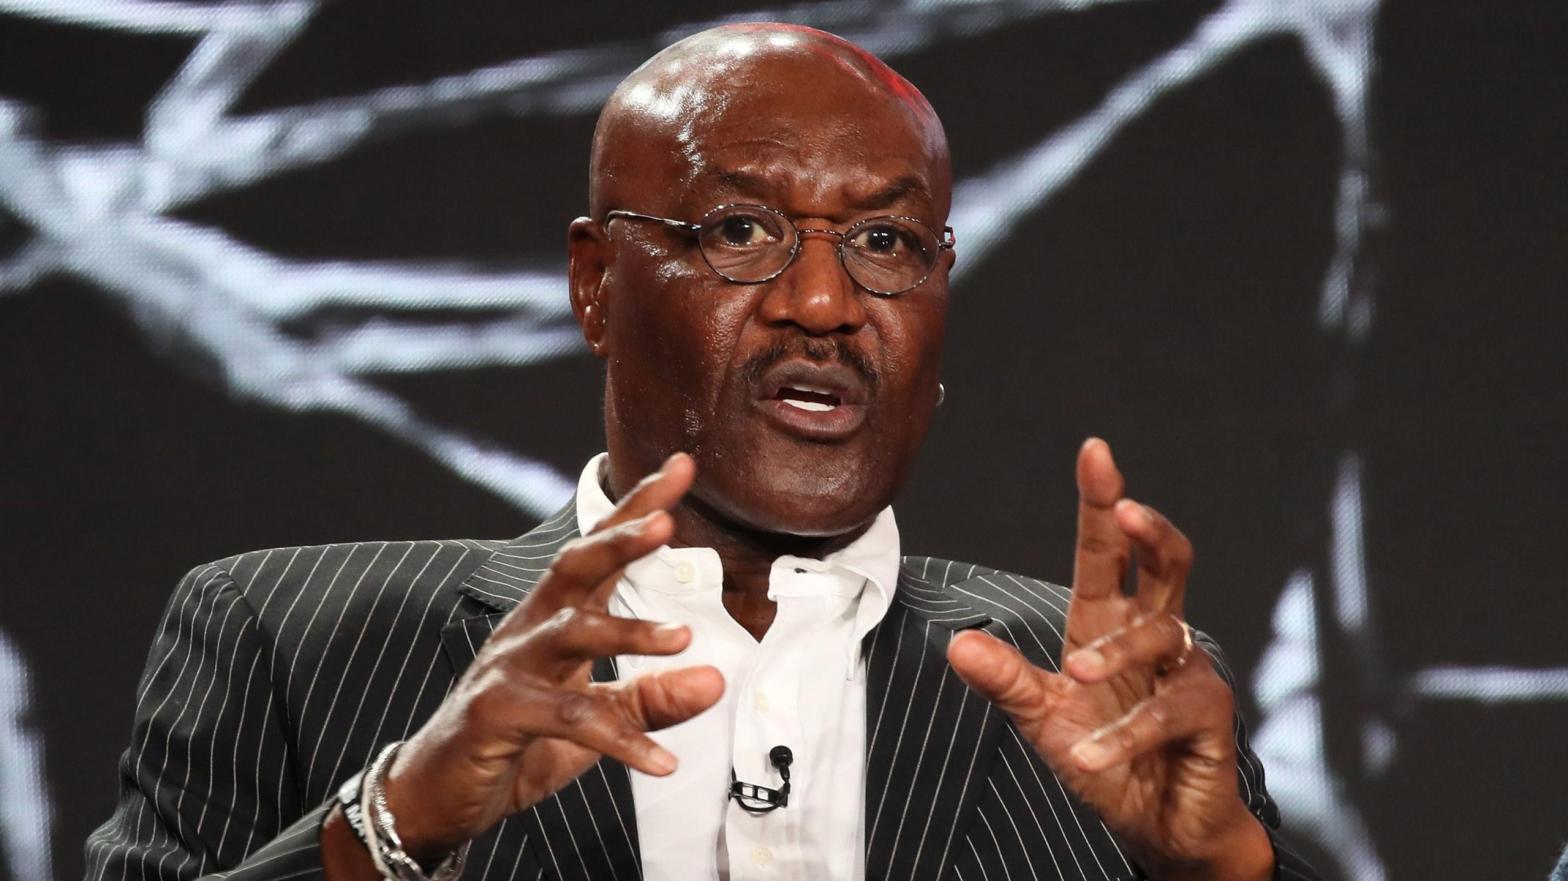 Delroy Lindo at the CBS All Access segment of the 2020 Winter TCA Tour. (Photo: David Livingston/Getty Images)